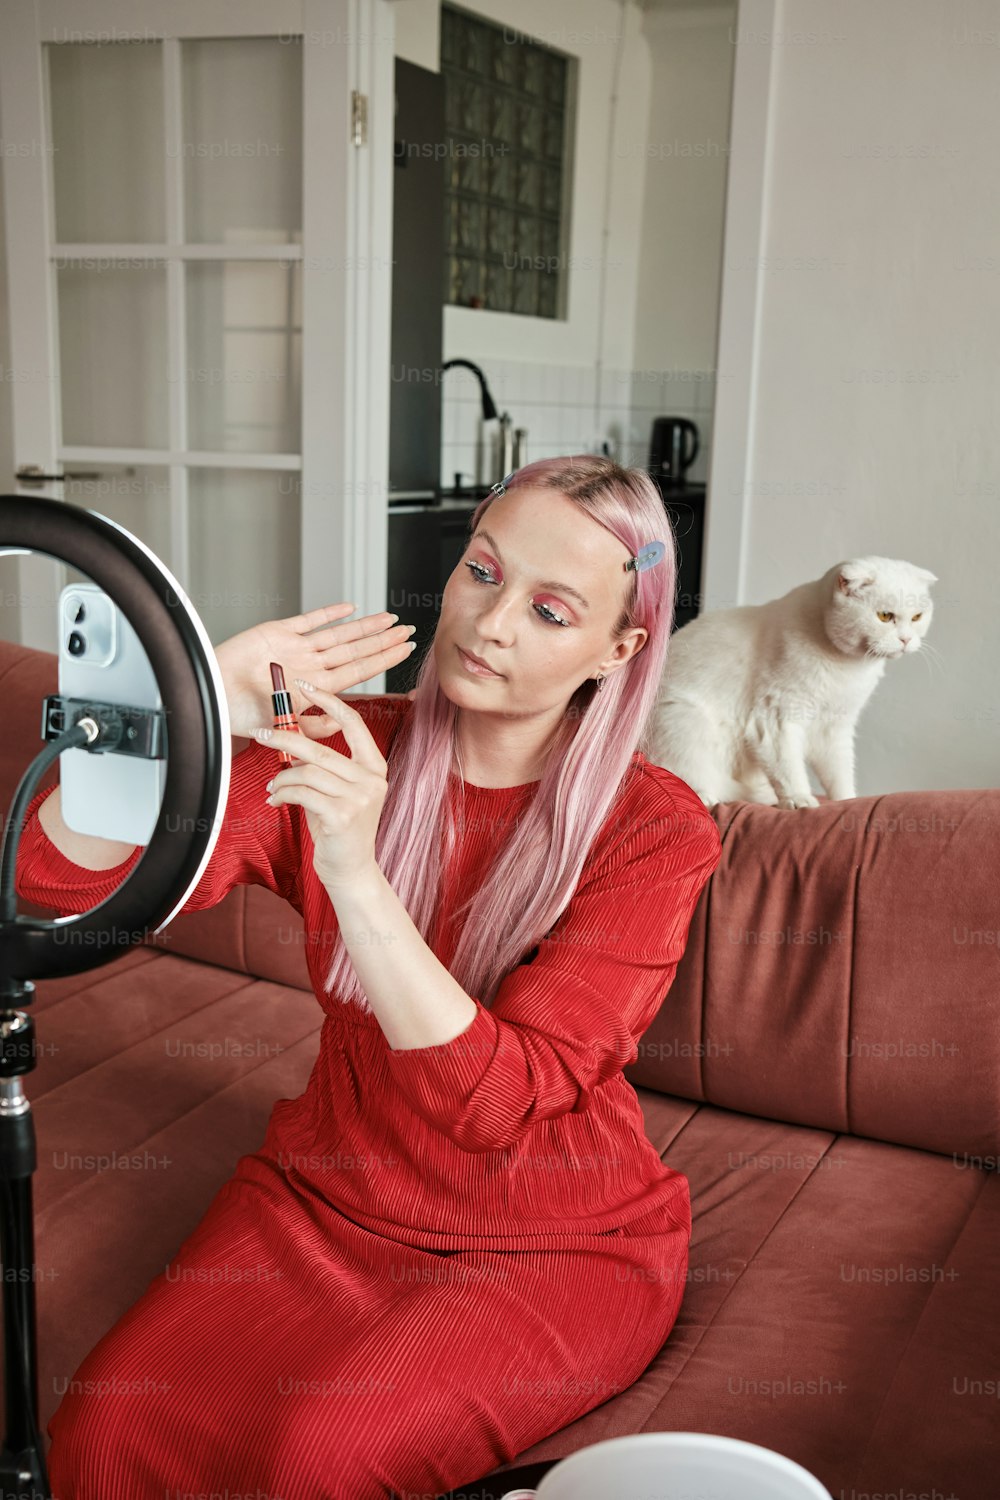 a woman with pink hair sitting on a couch